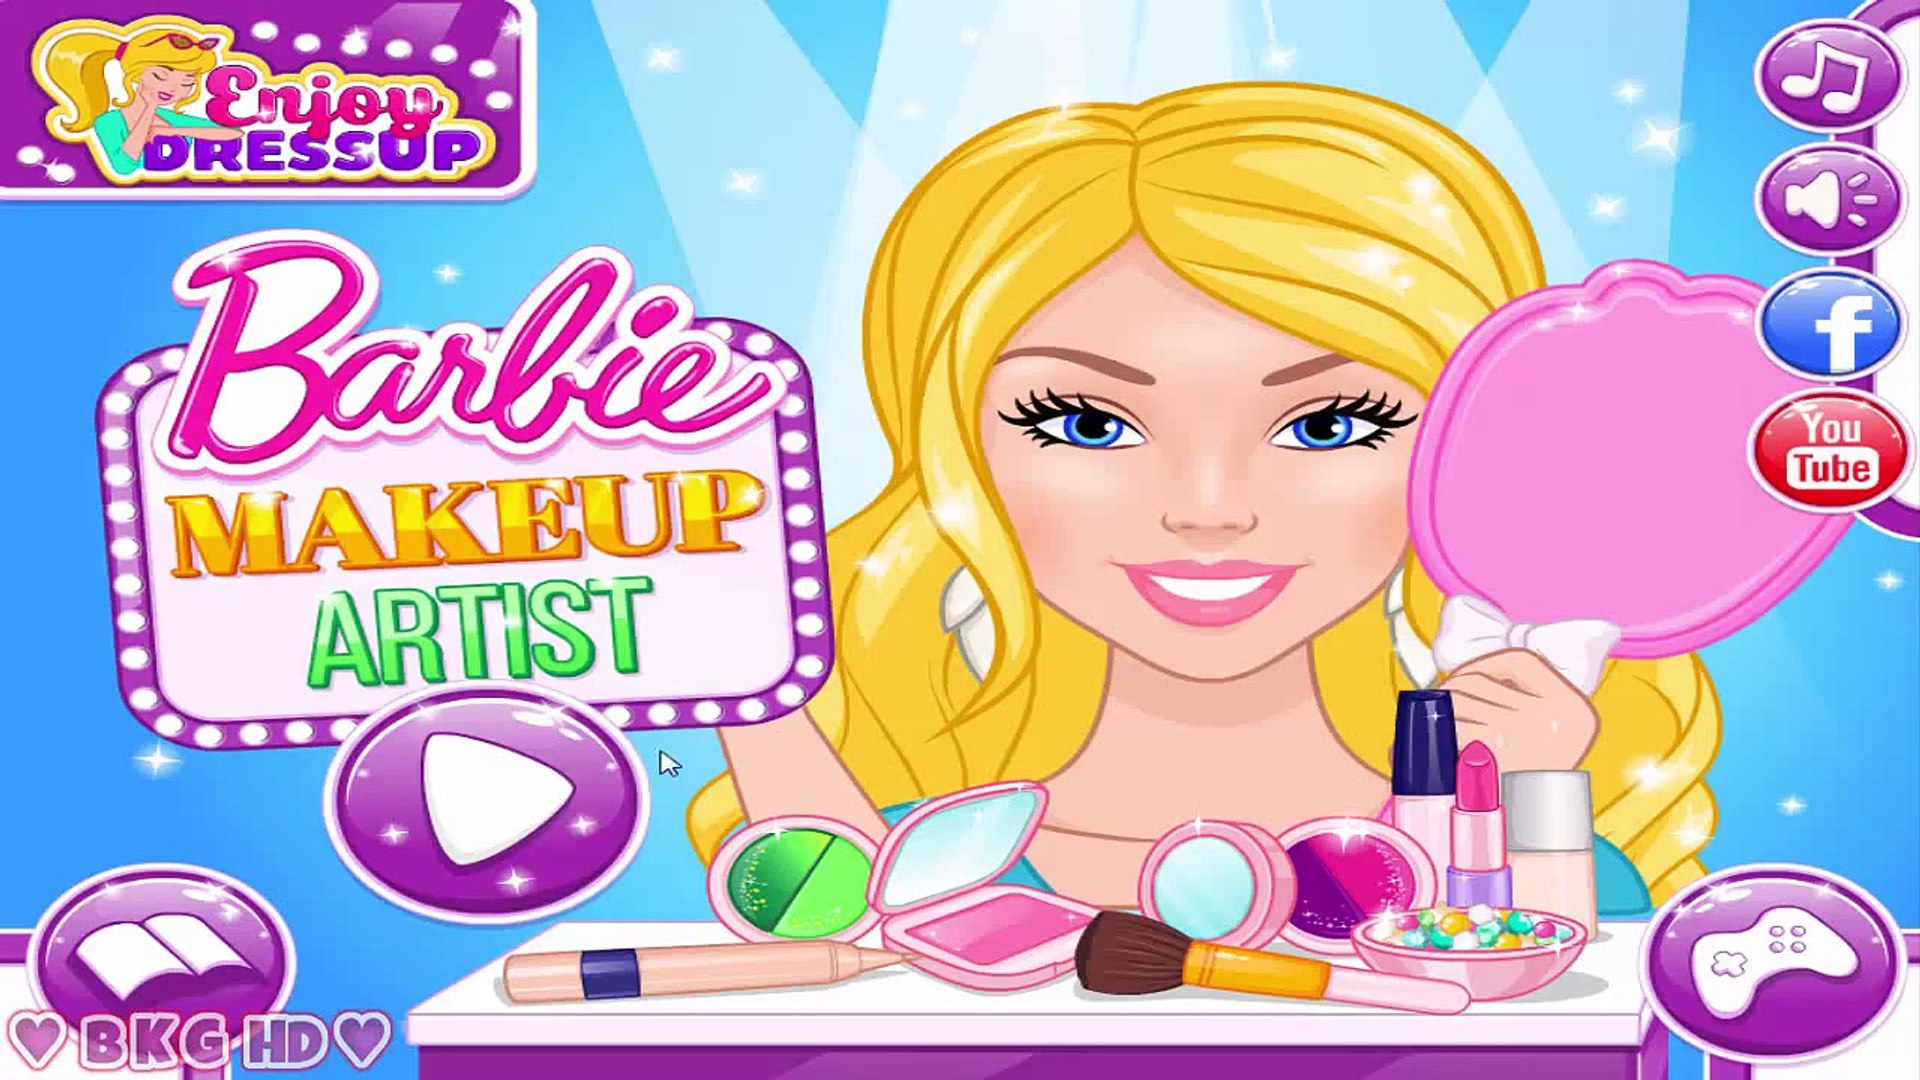 Barbie Makeup Artist ♥ Barbie Make Up Video Game for Girls - video  Dailymotion